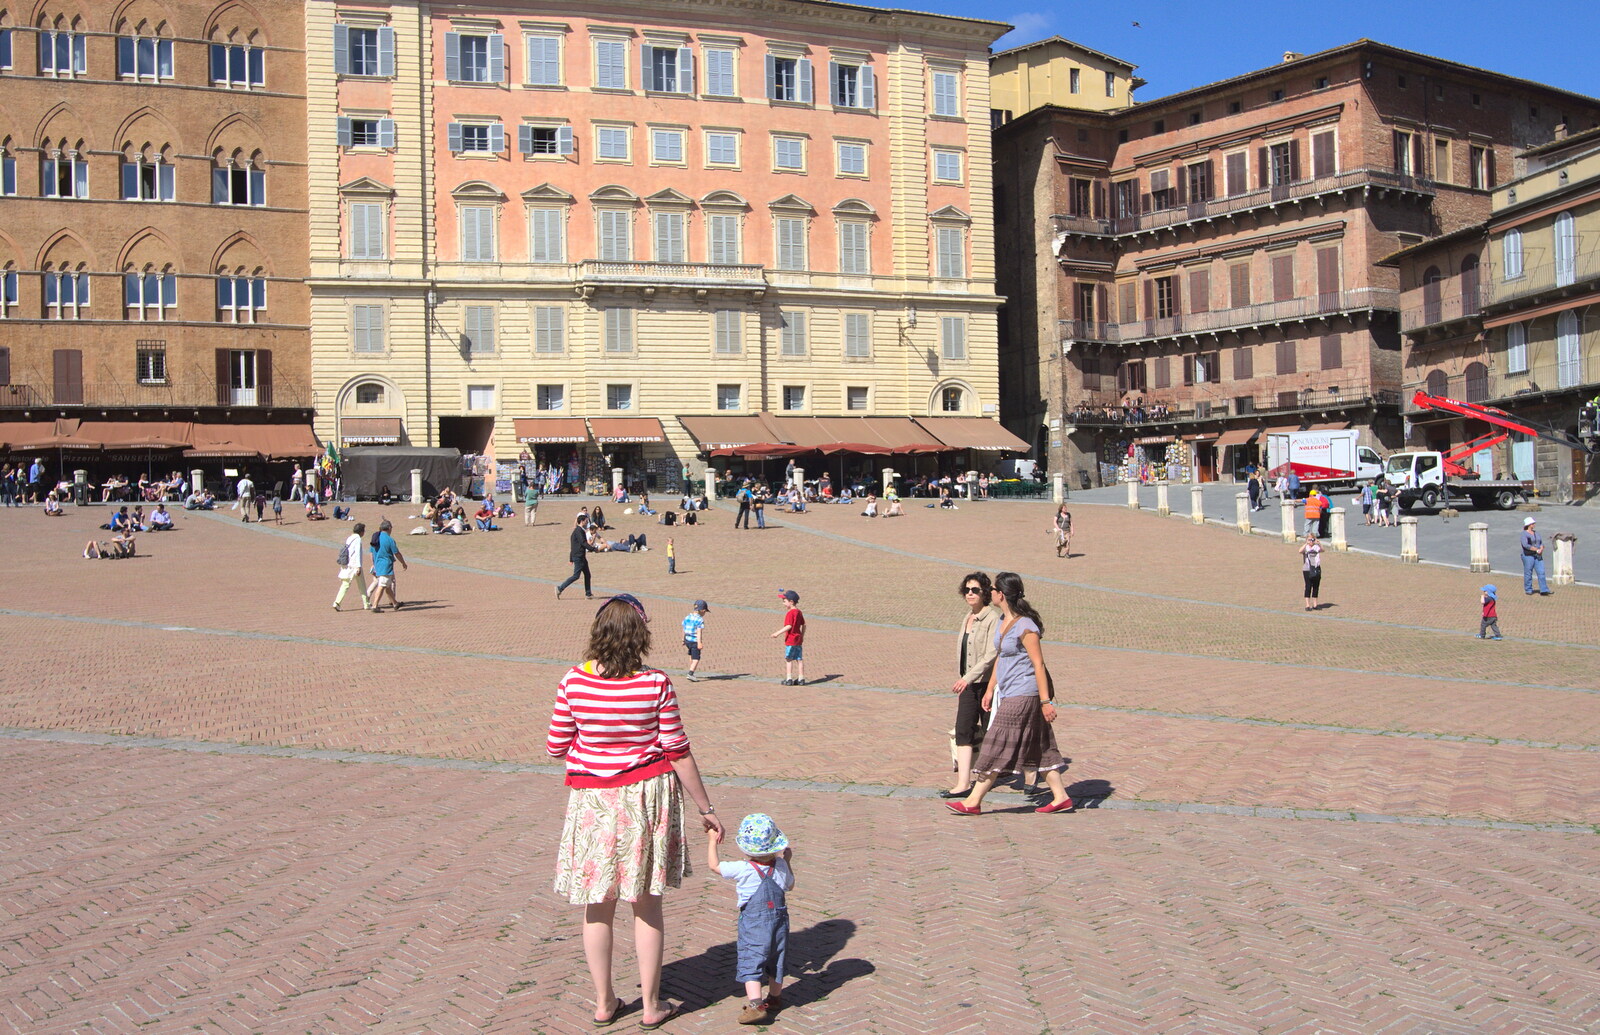 A Tuscan Winery and a Trip to Siena, Tuscany, Italy - 10th June 2013: Back on the Piazza del Campo